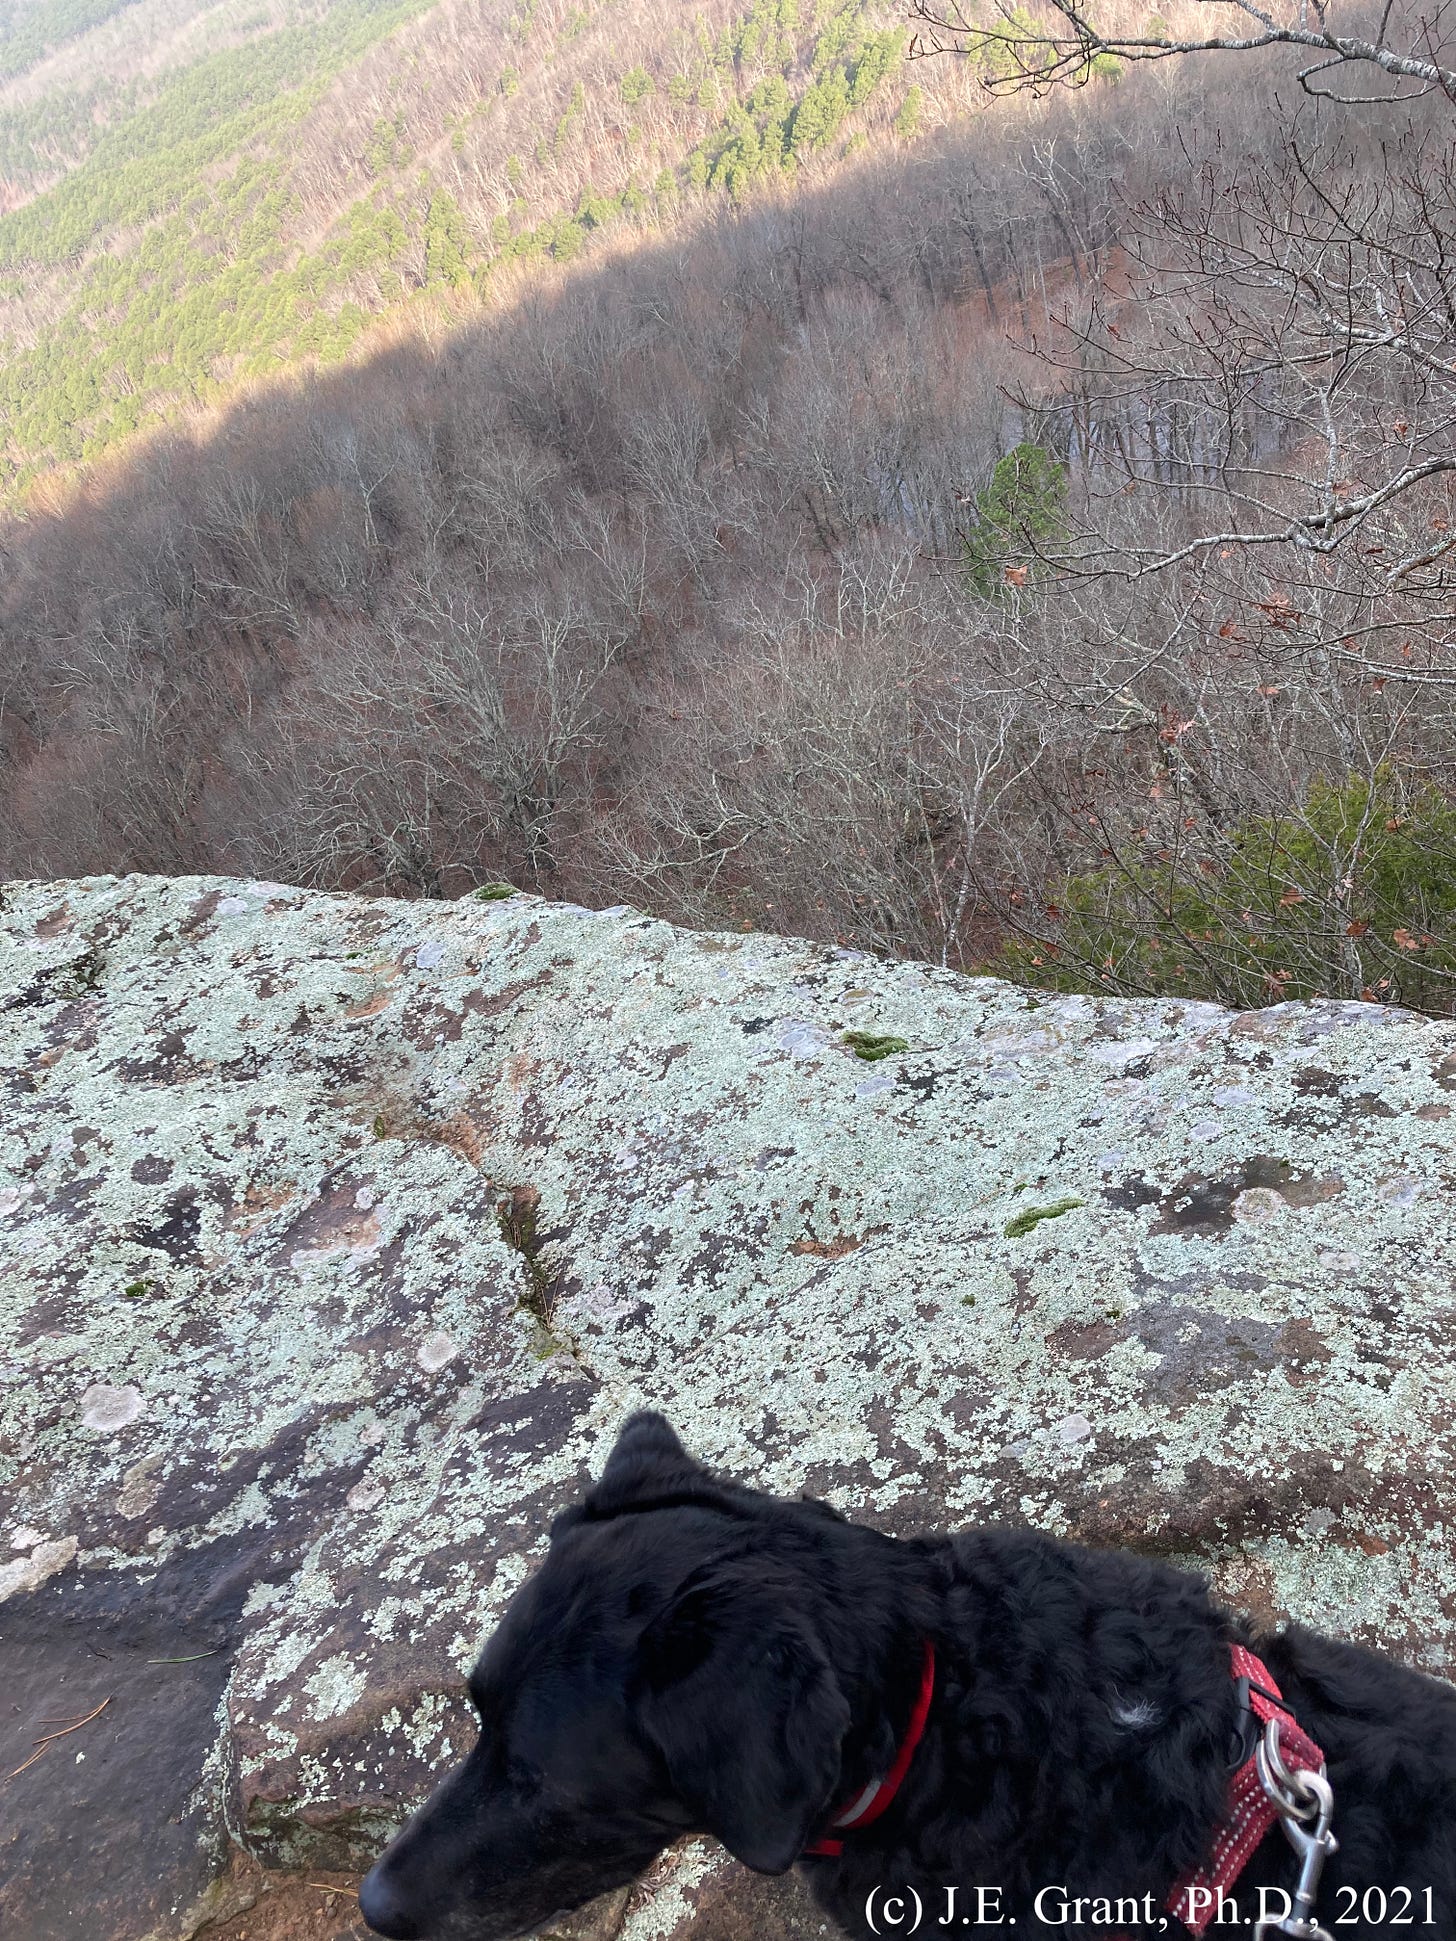 Landscape view of an expanse of trees with the rock cliff, covered in lichen, and a black lab in the foreground